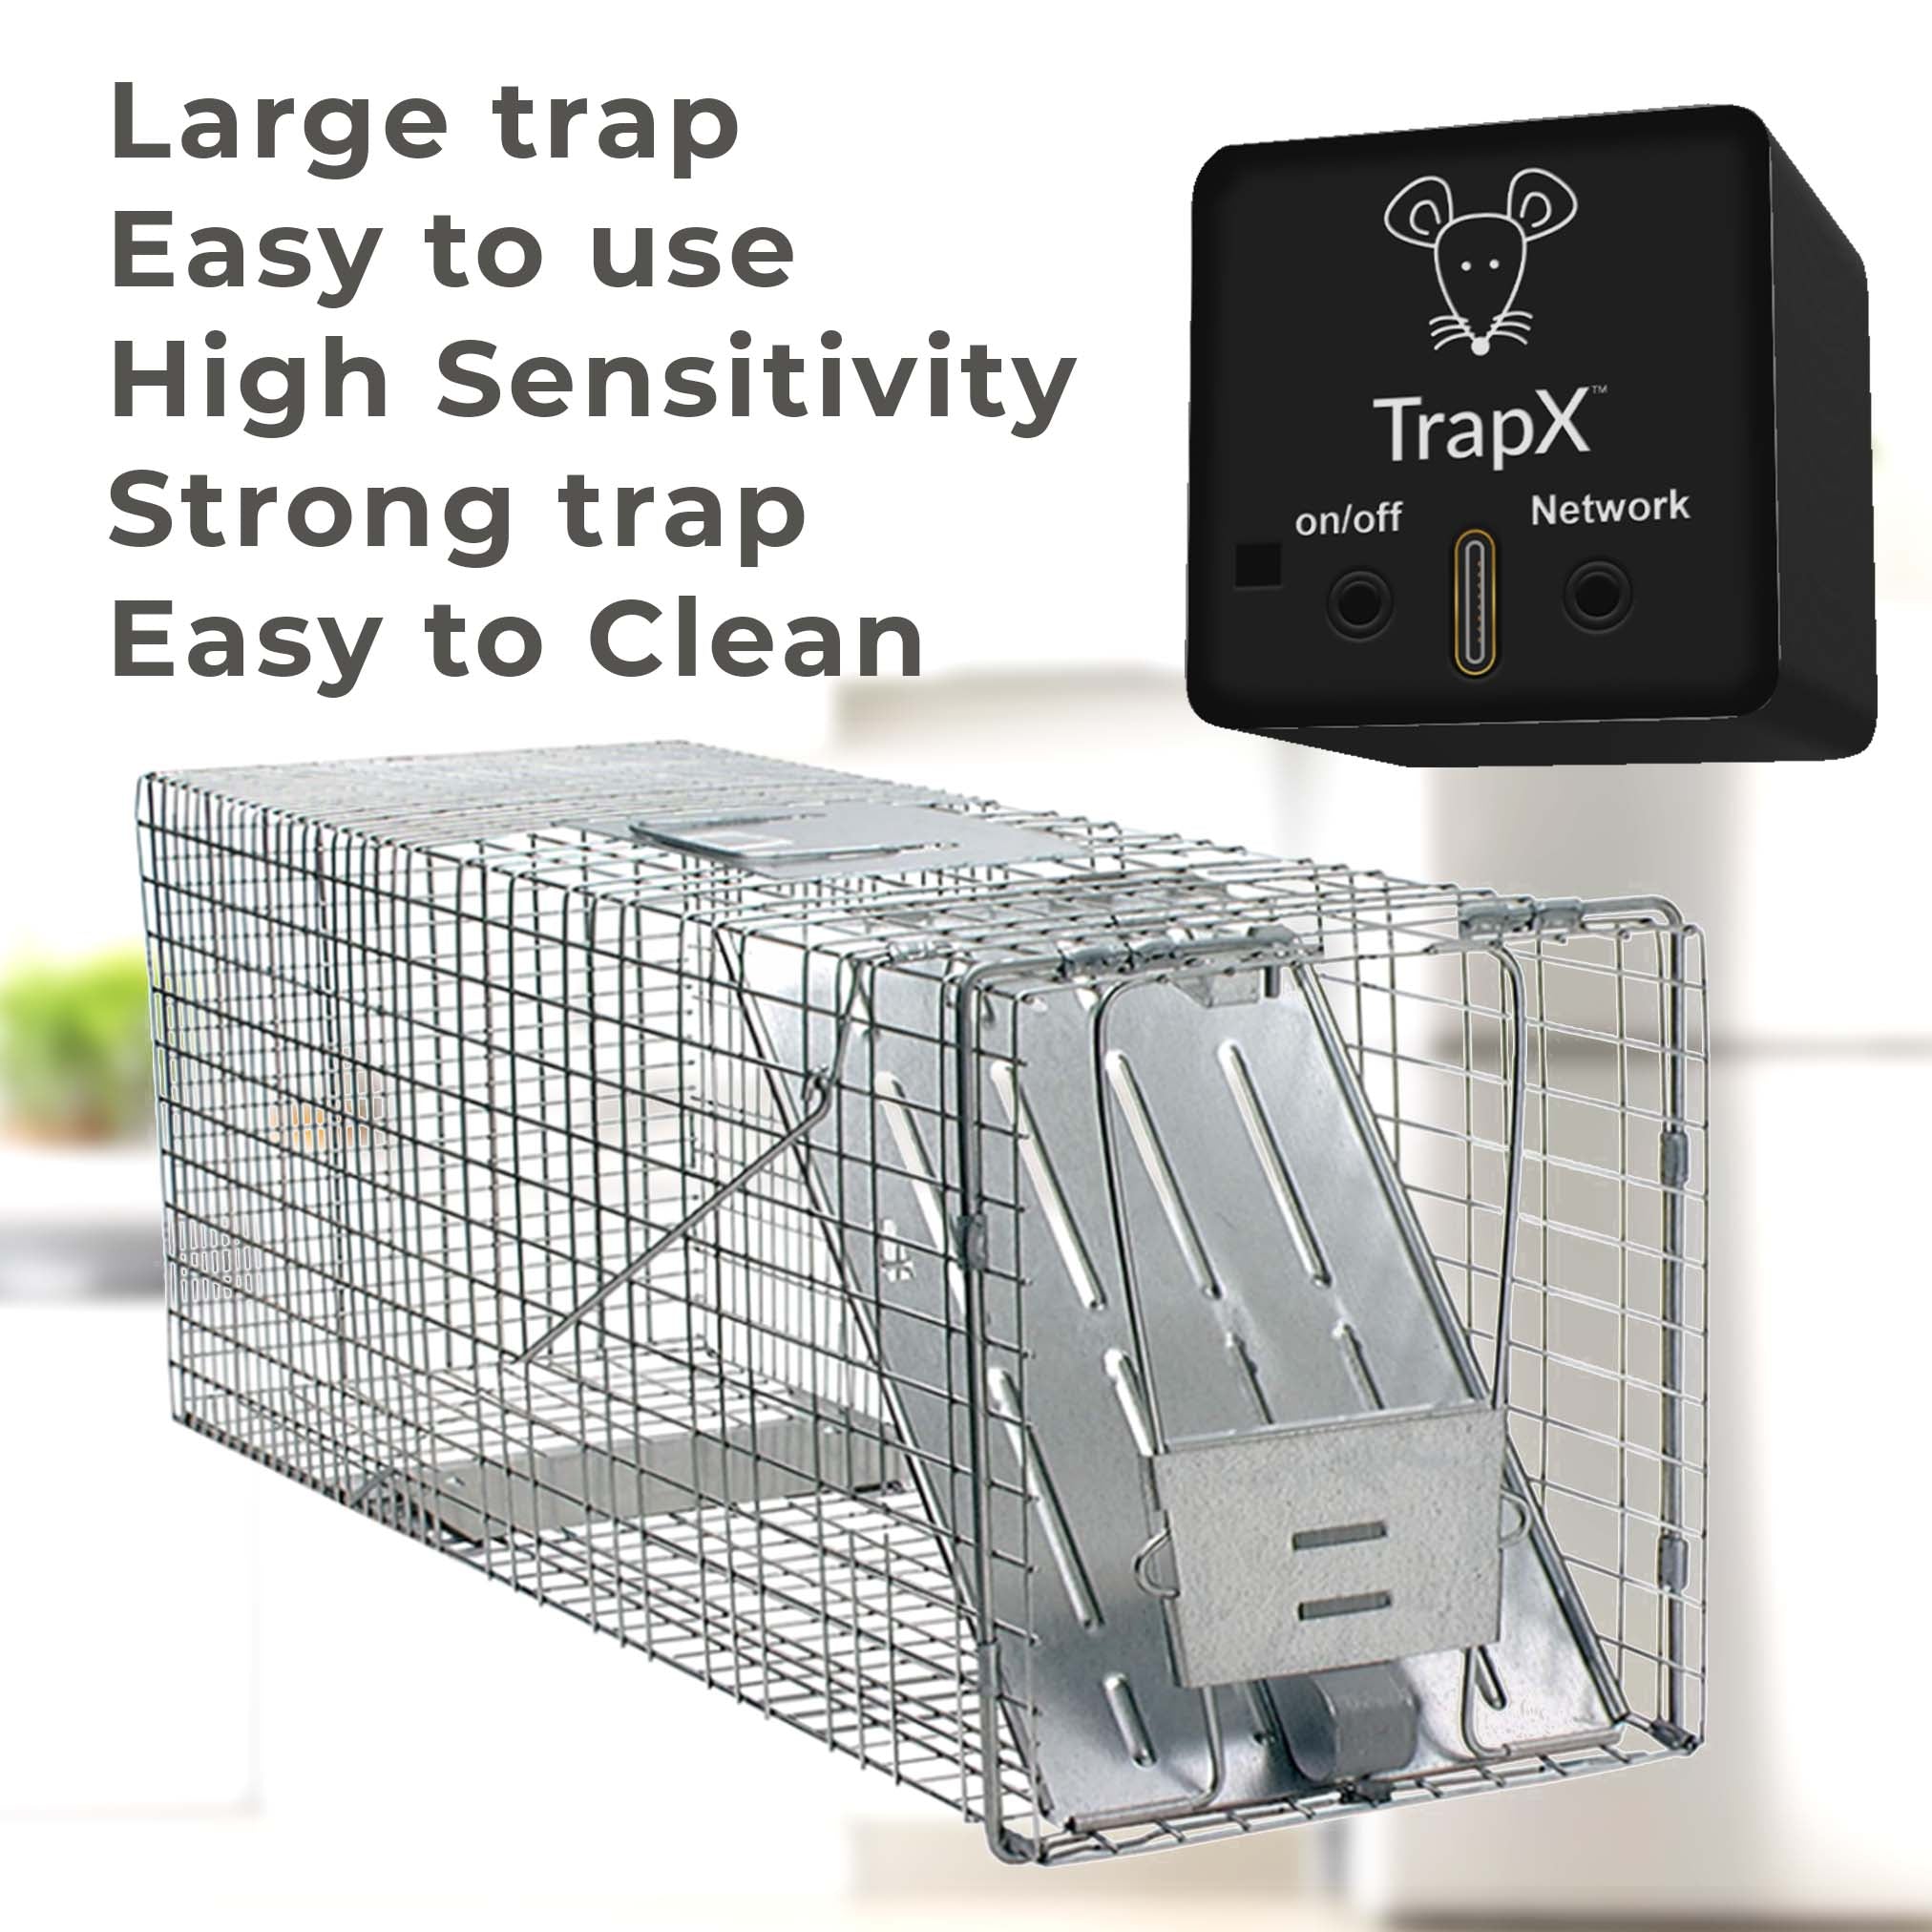 What are the features of the TrapX Smart AI ML Mouse Trap Sensor for pest control?